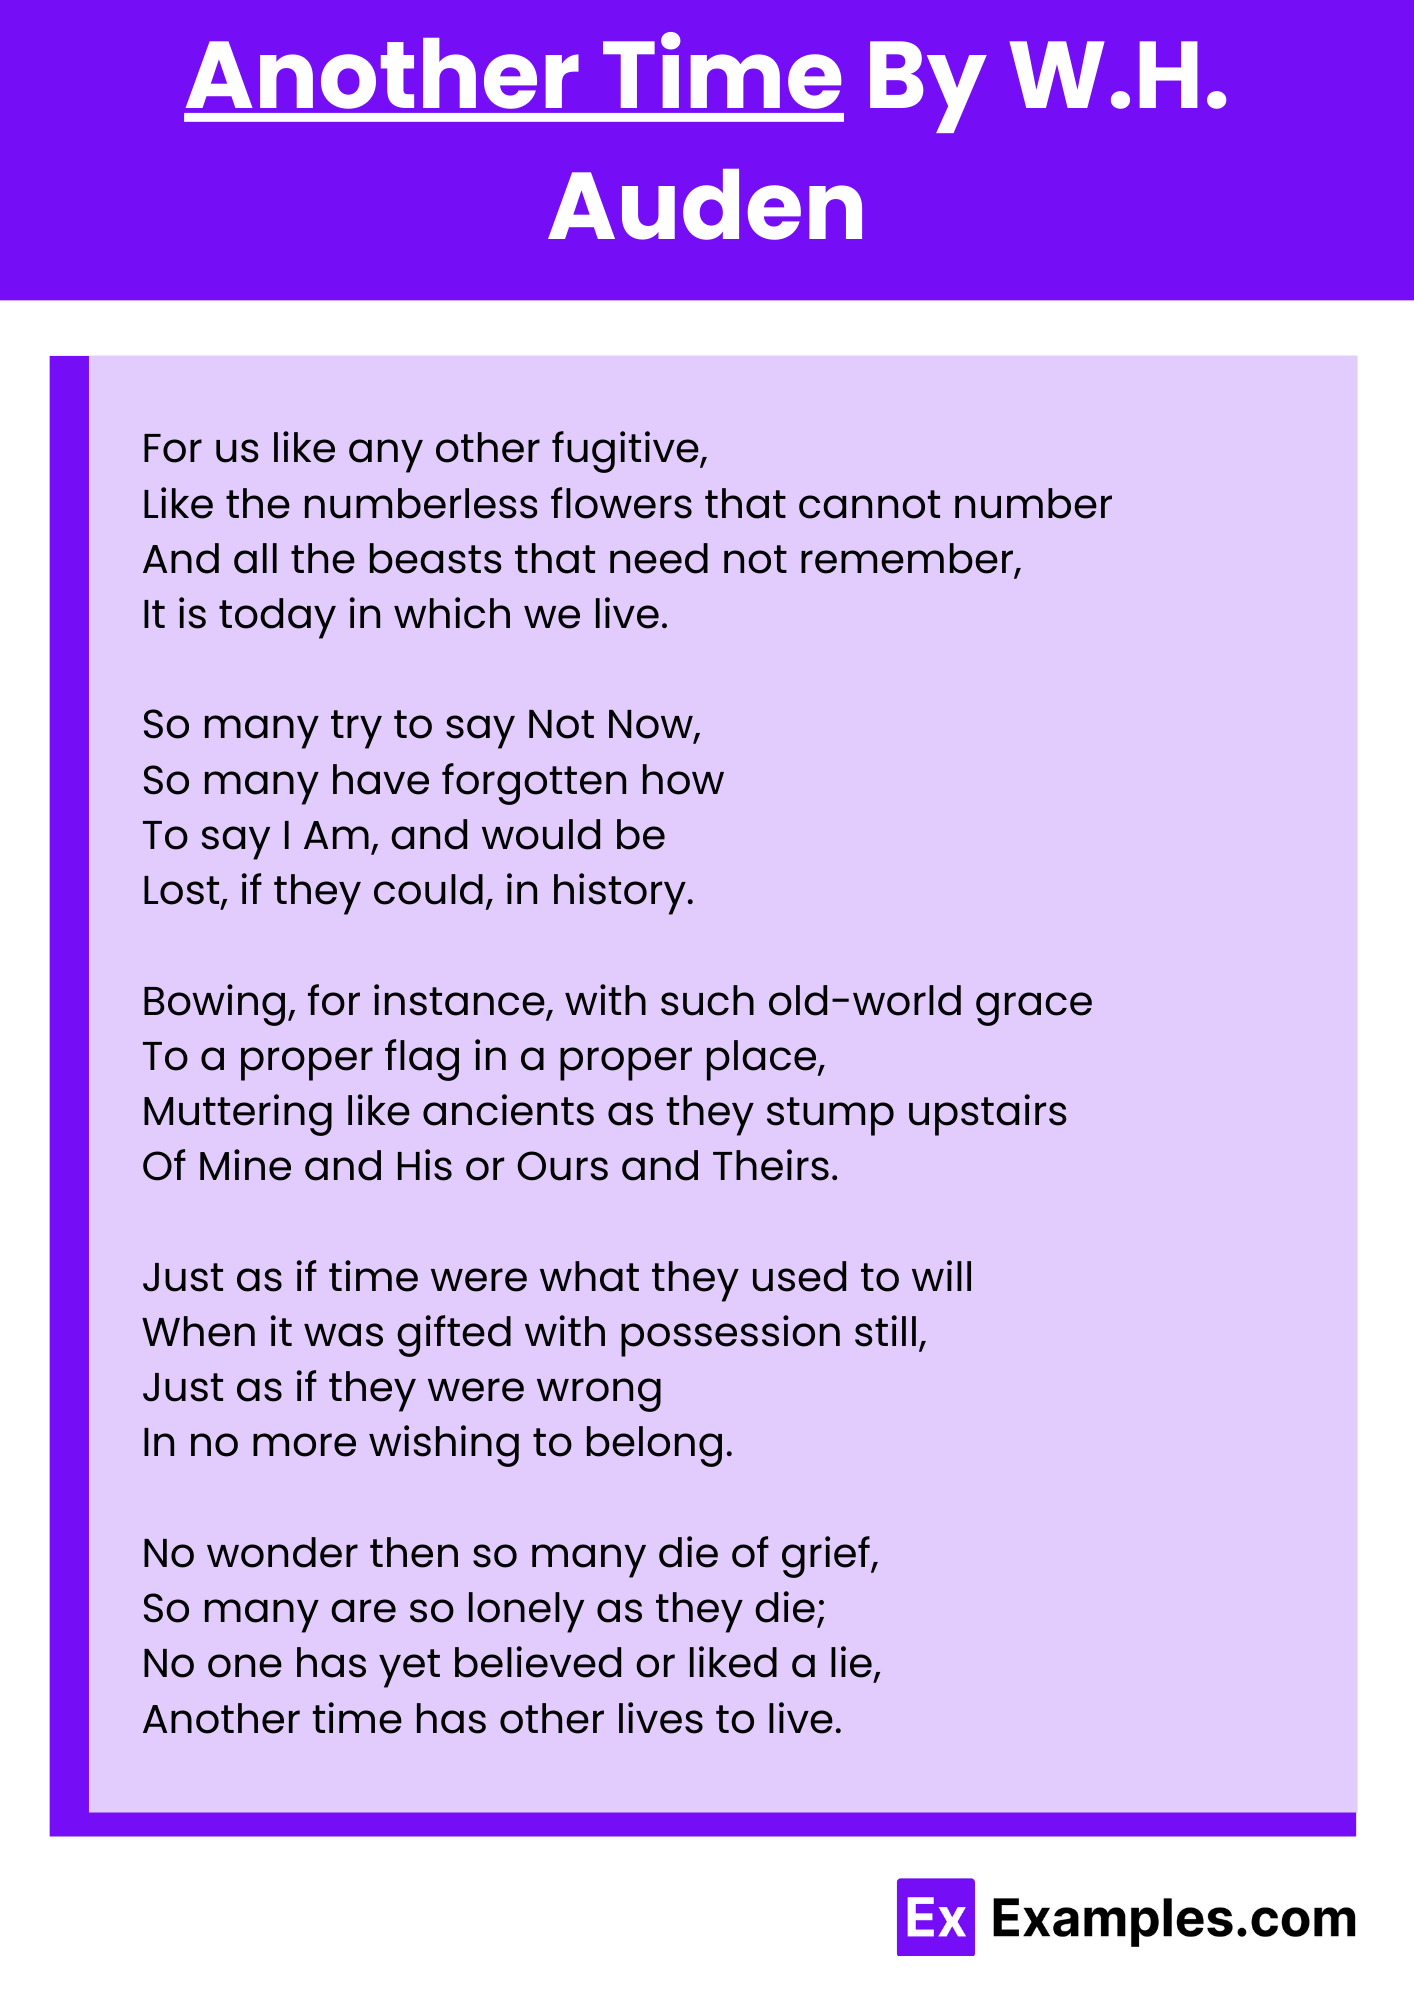 Another Time By W.H. Auden